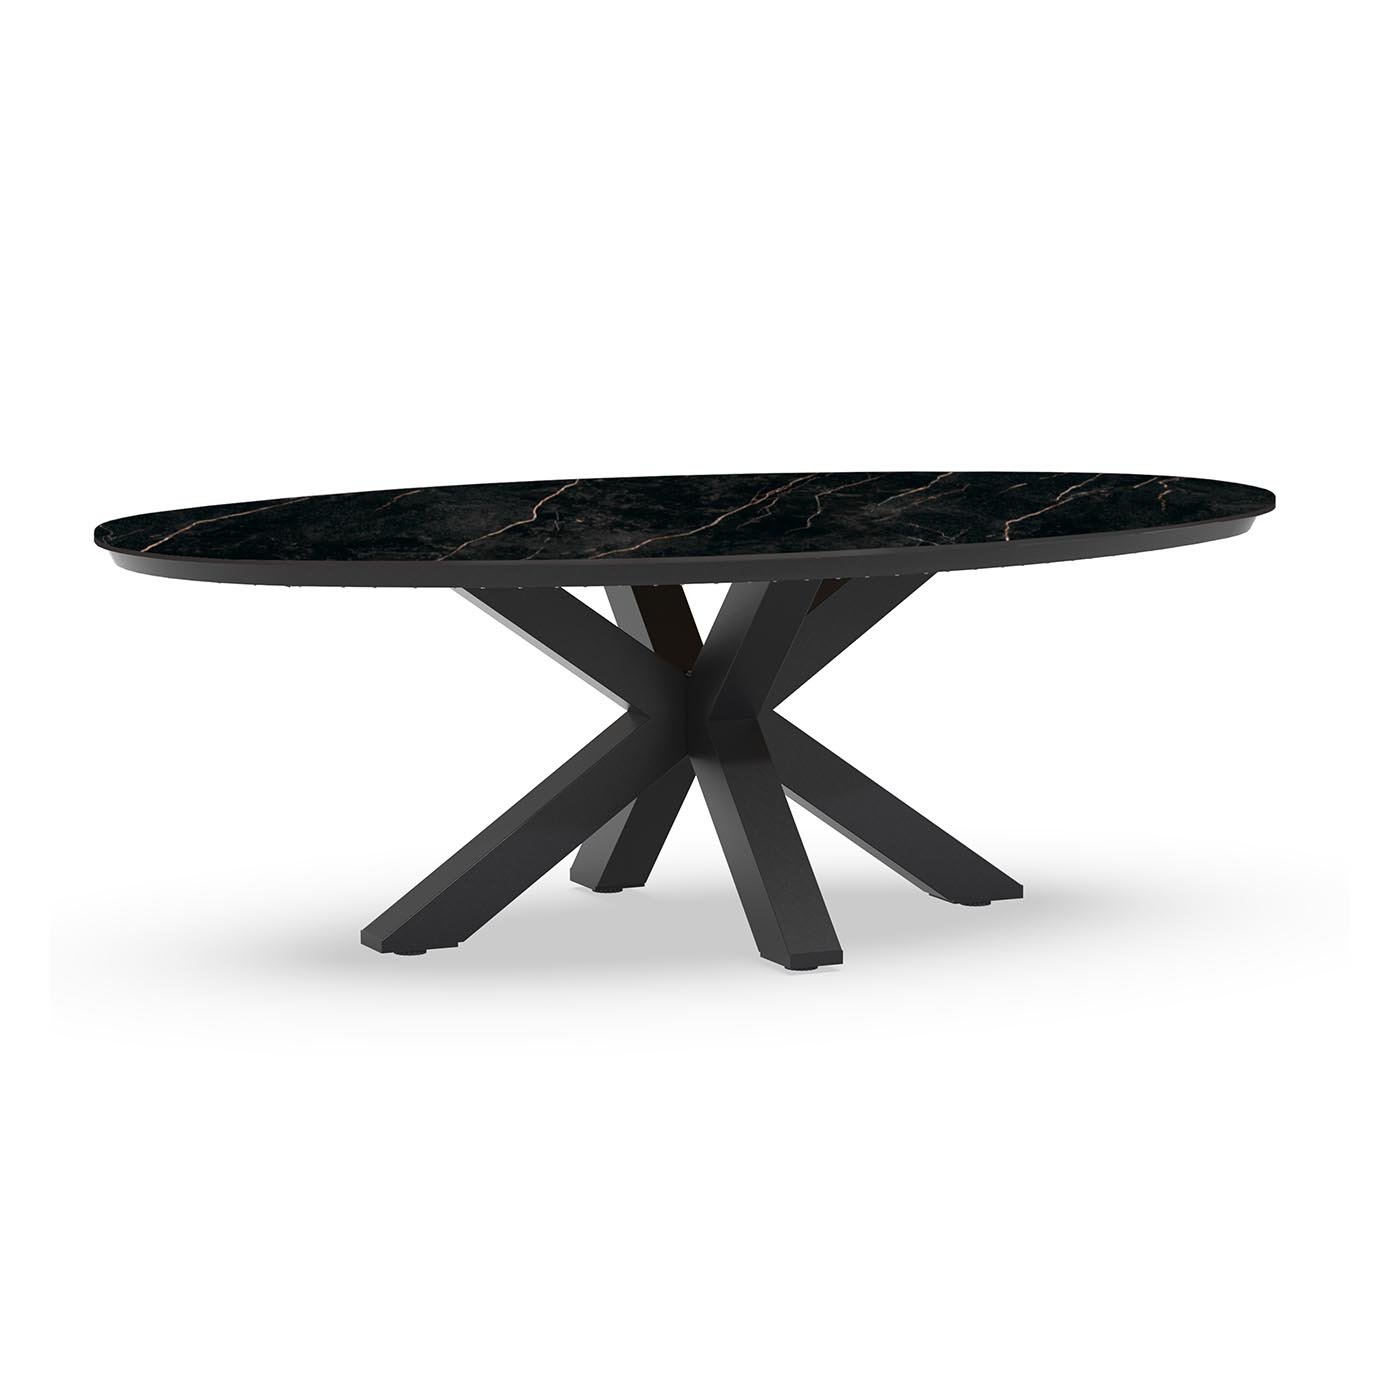 Oblong Dining Table Trespa Marble 220 x 130 cm Charcoal